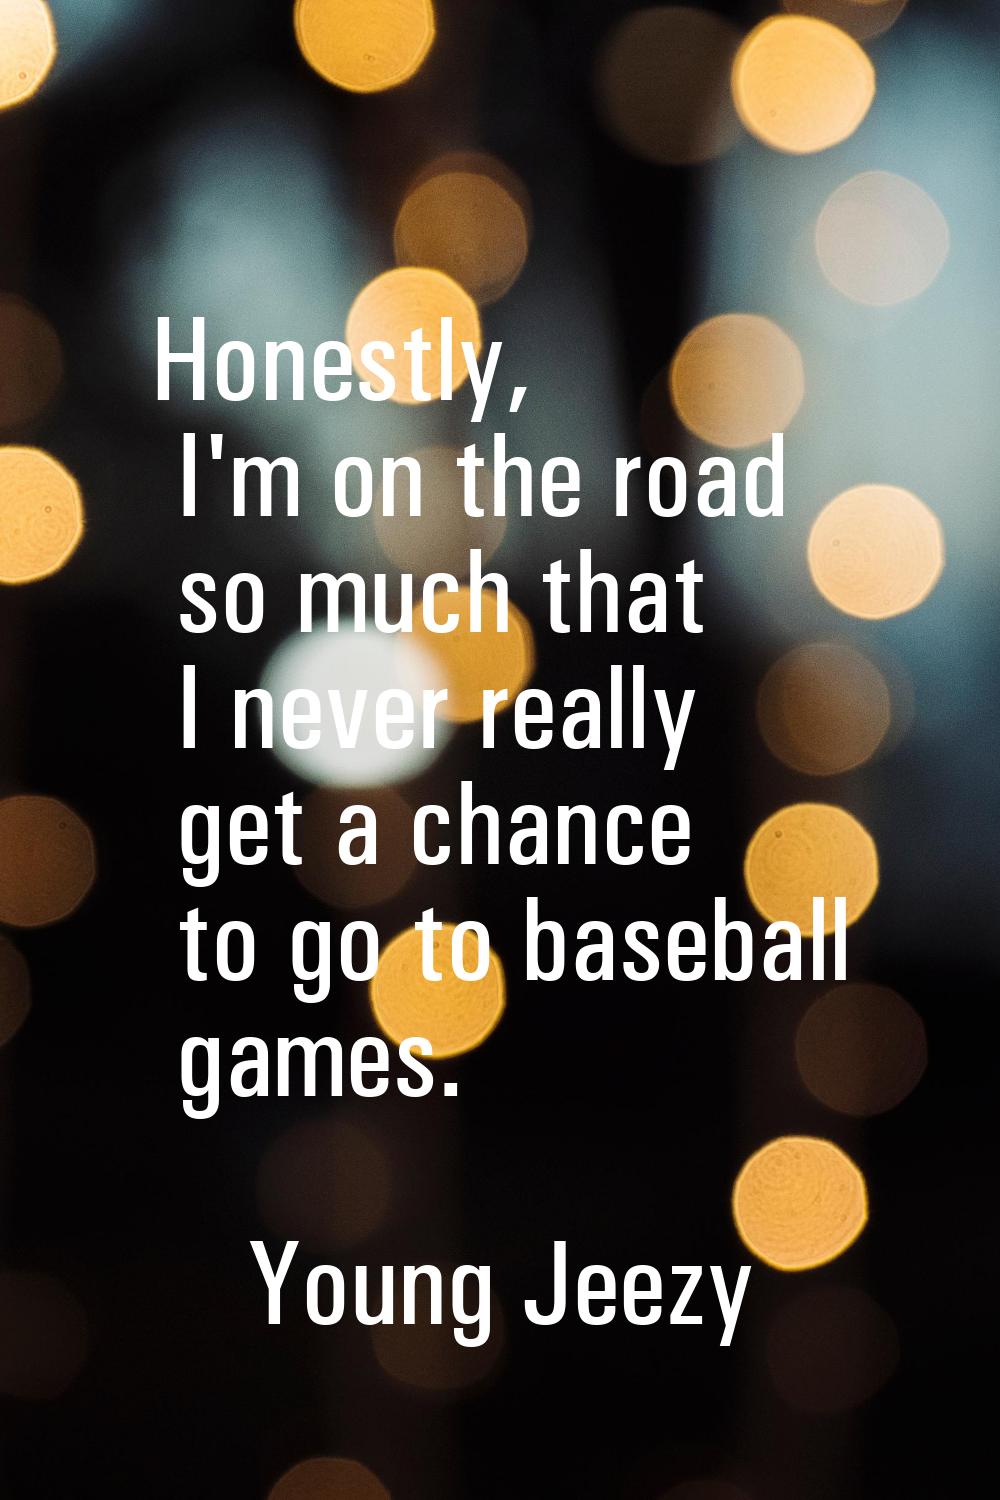 Honestly, I'm on the road so much that I never really get a chance to go to baseball games.